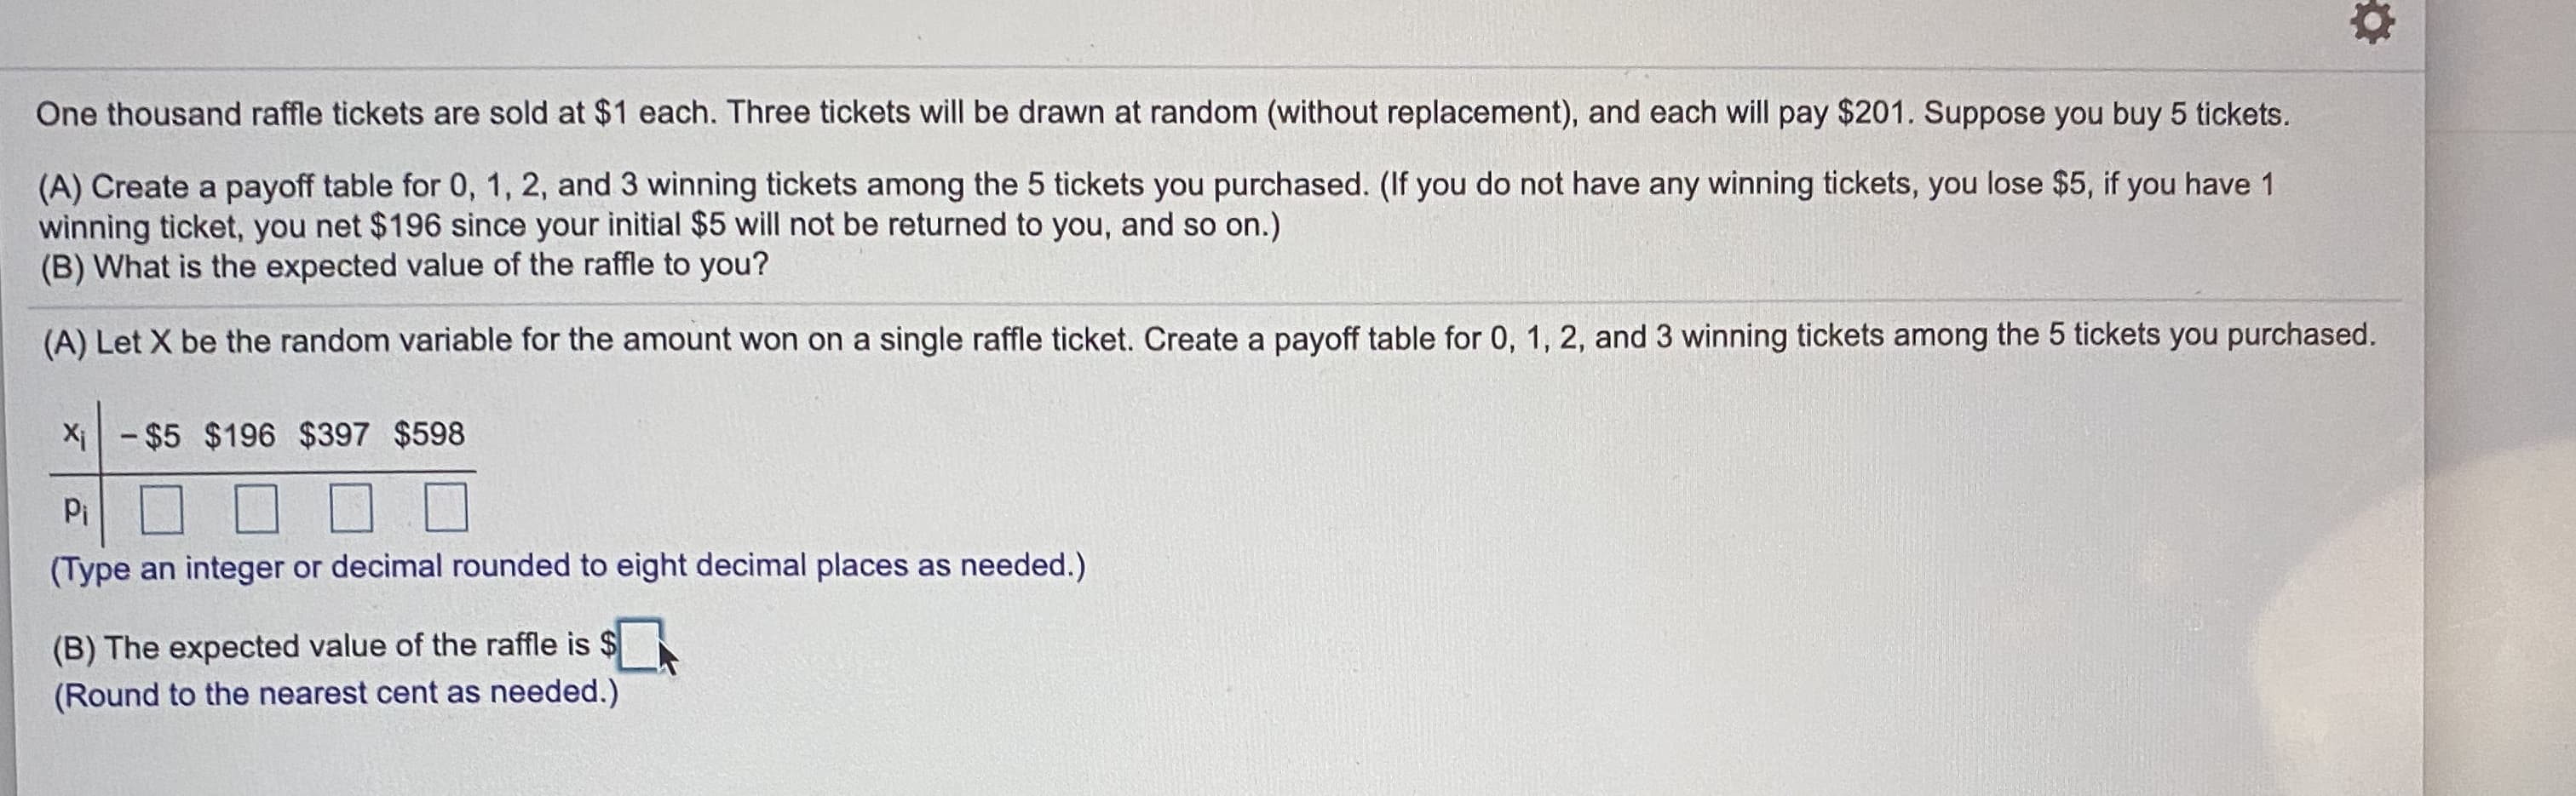 One thousand raffle tickets are sold at $1 each. Three tickets will be drawn at random (without replacement), and each will pay $201. Suppose you buy 5 tickets.
(A) Create a payoff table for 0, 1, 2, and 3 winning tickets among the 5 tickets you purchased. (If you do not have any winning tickets, you lose $5, if you have 1
winning ticket, you net $196 since your initial $5 will not be returned to you, and so on.)
(B) What is the expected value of the raffle to you?
(A) Let X be the random variable for the amount won on a single raffle ticket. Create a payoff table for 0, 1, 2, and 3 winning tickets among the 5 tickets you purchased.
Xi-$5 $196 $397 $598
